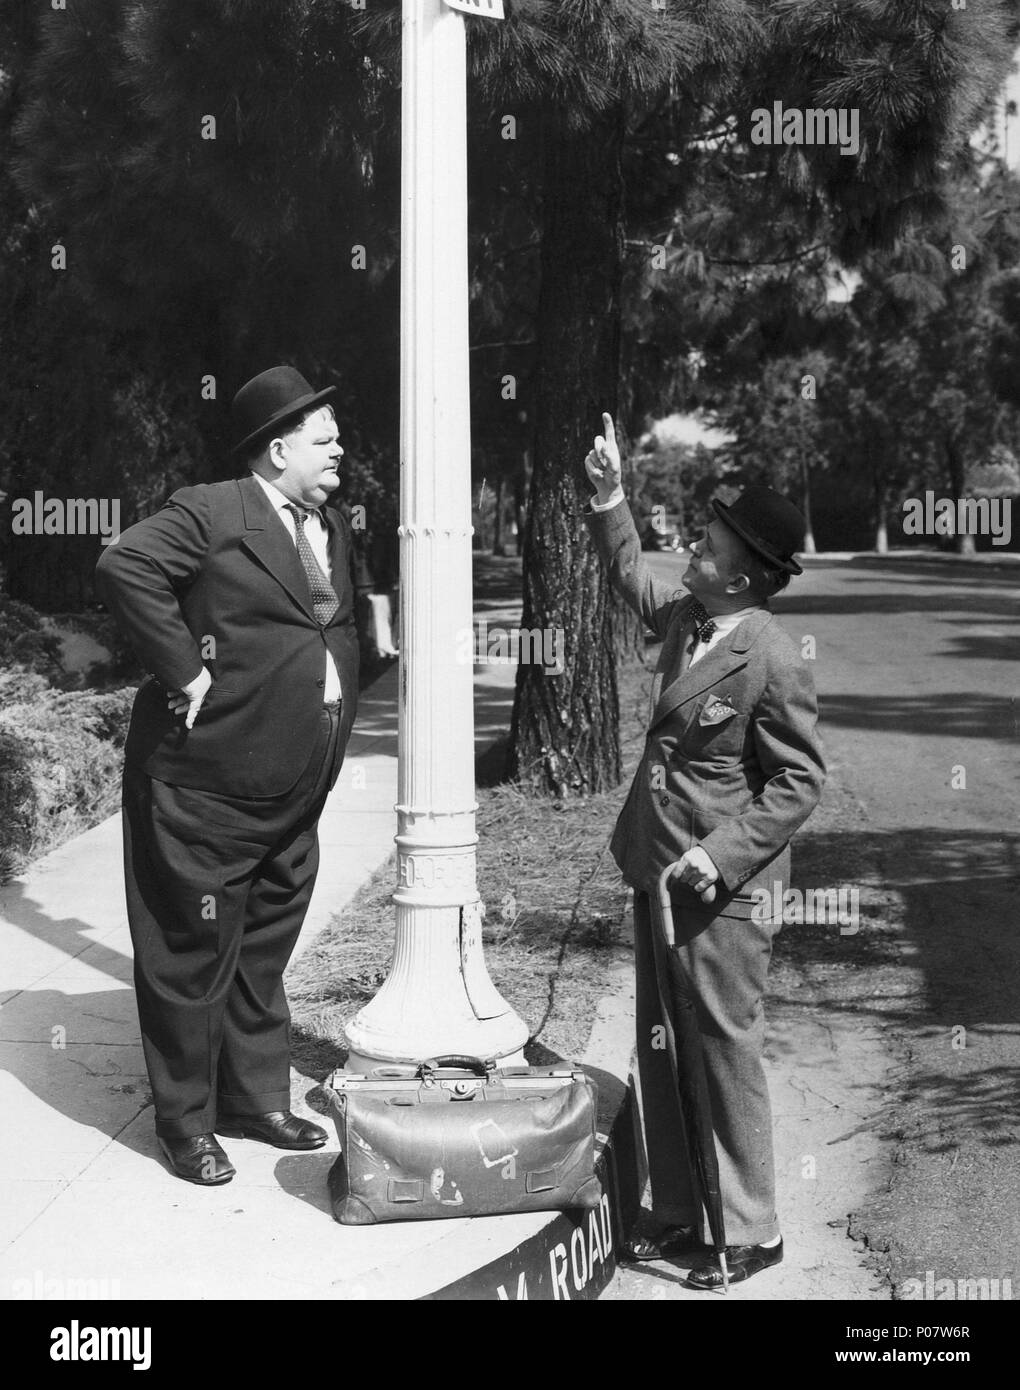 Original Film Title: THE BIG NOISE.  English Title: THE BIG NOISE.  Film Director: MALCOLM ST. CLAIR.  Year: 1944.  Stars: OLIVER HARDY; STAN LAUREL. Credit: 20TH CENTURY FOX / Album Stock Photo